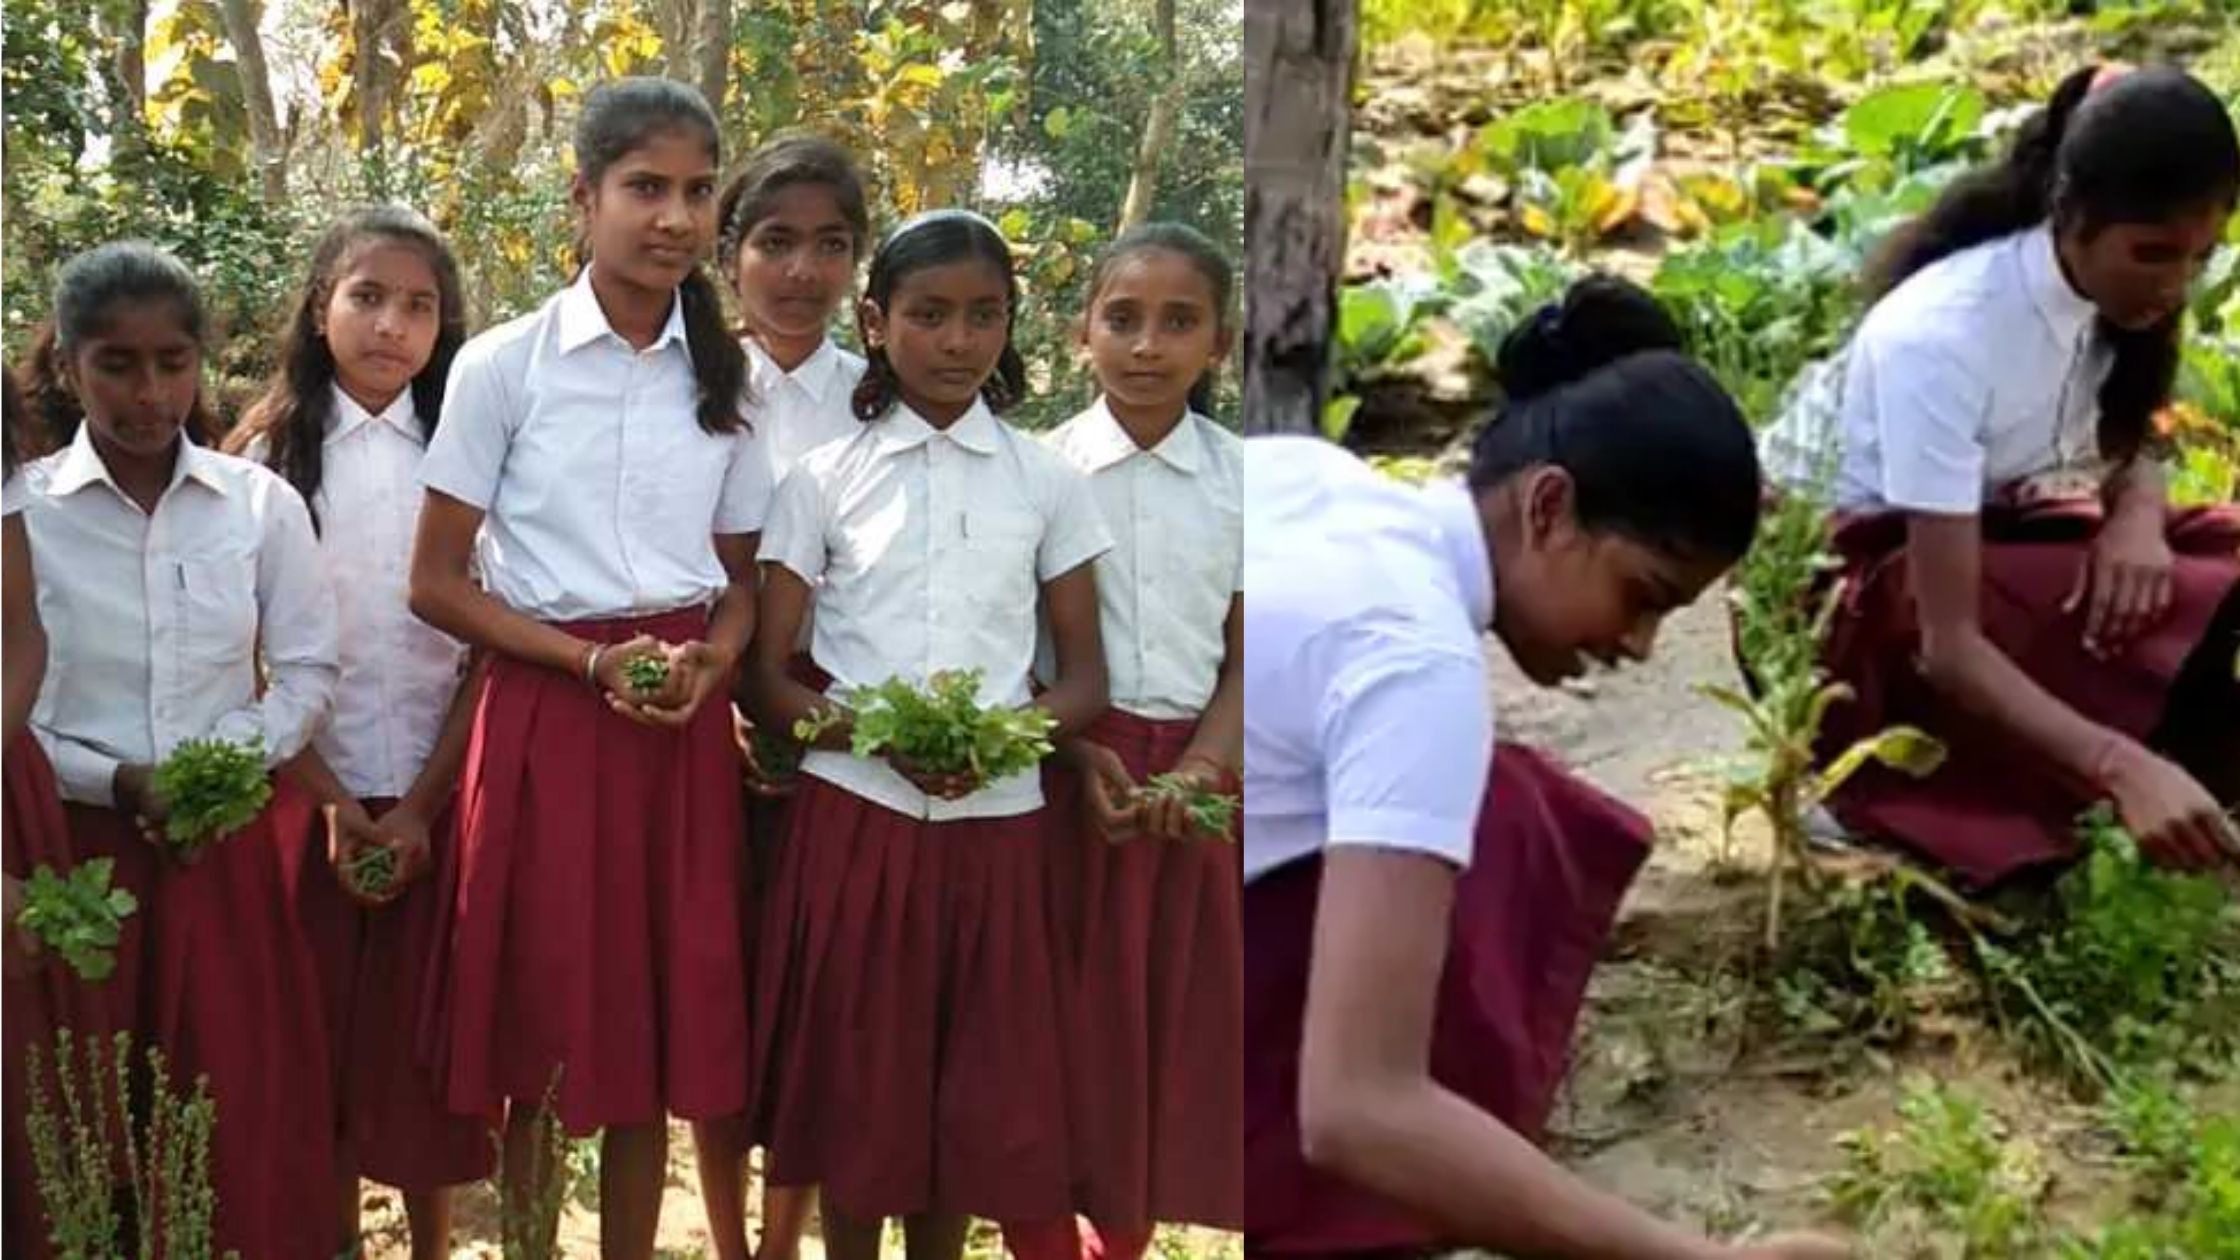 Agriculture education along with studies in this government school of Bihar